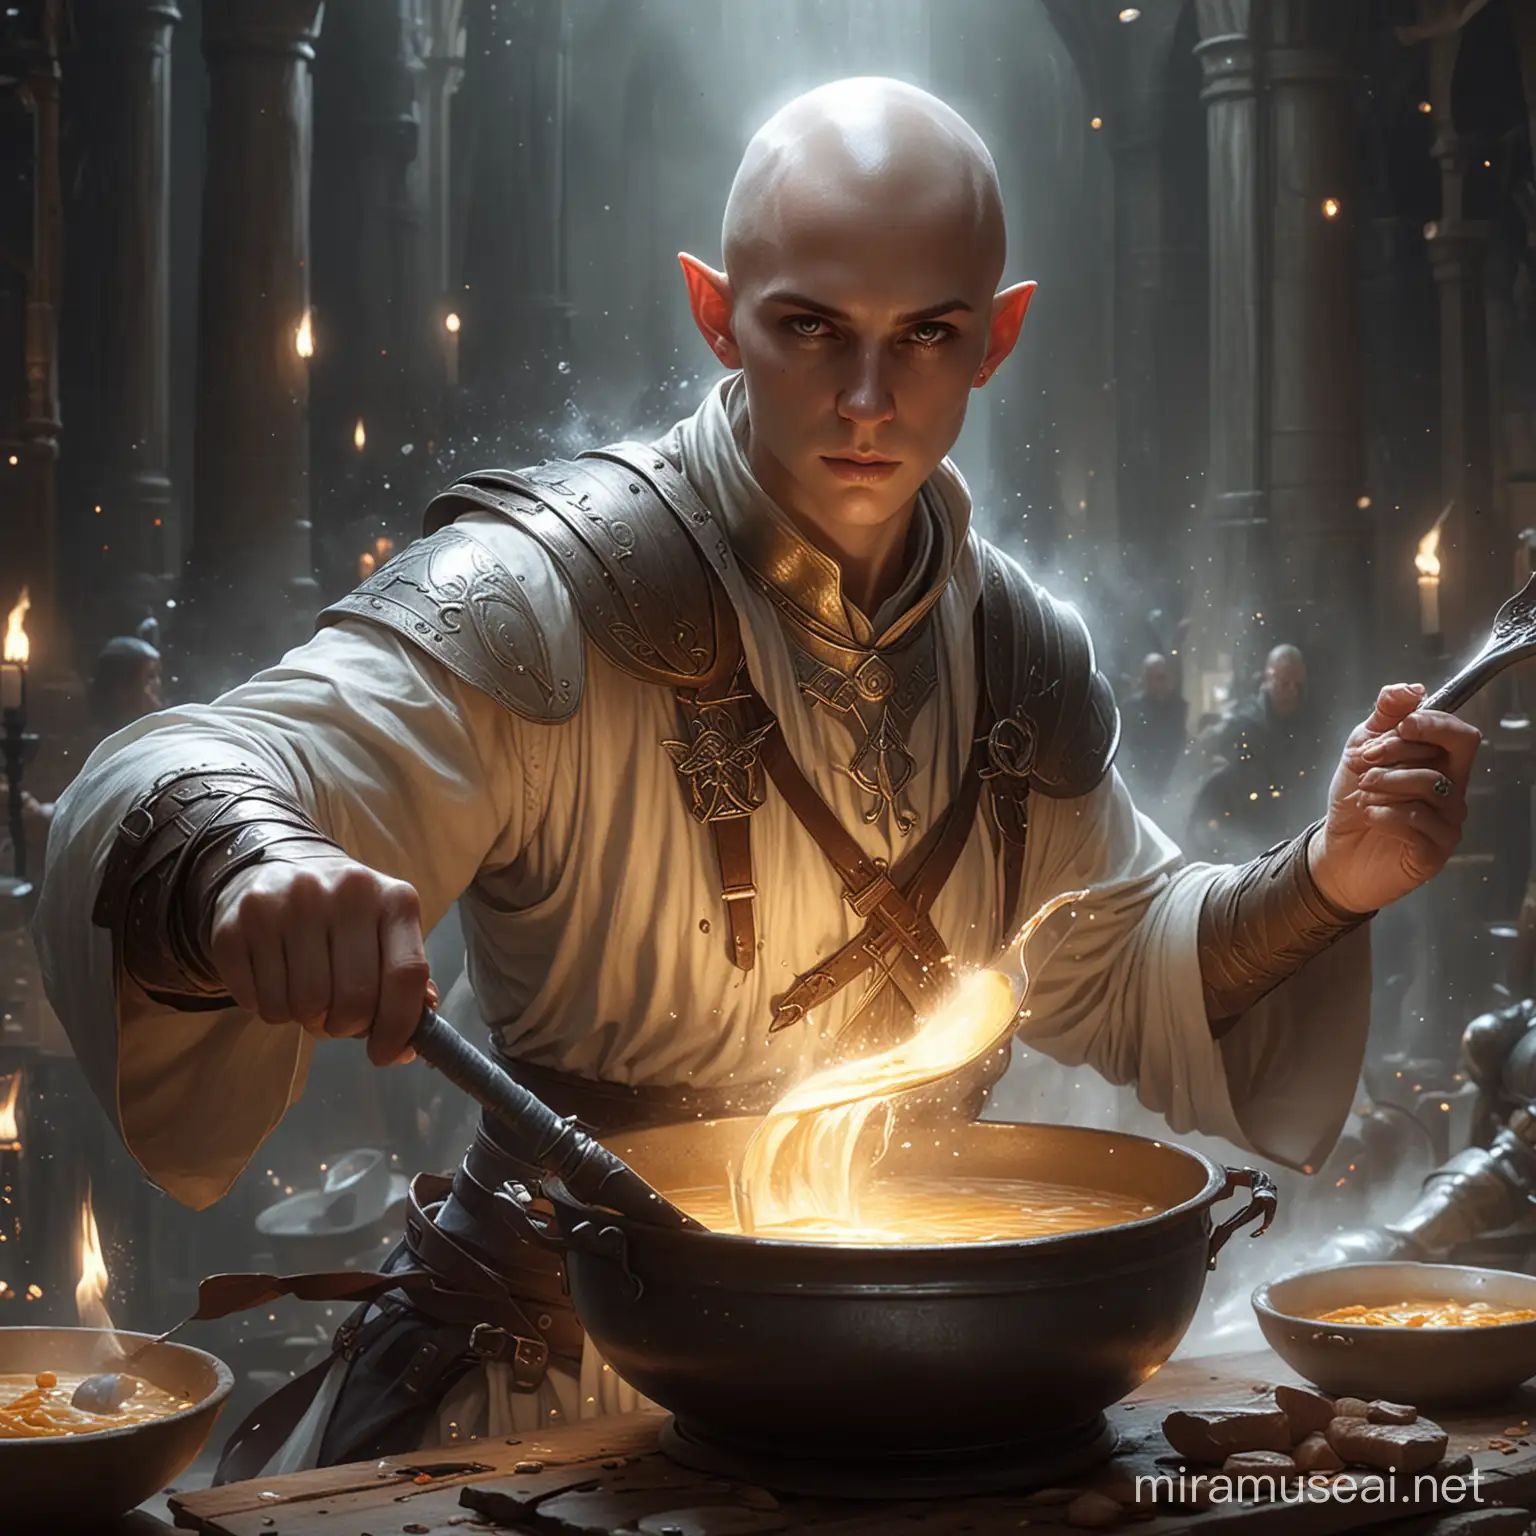 MagicInfused NonBinary Elf Cleric Wielding Soup Ladle in Battle